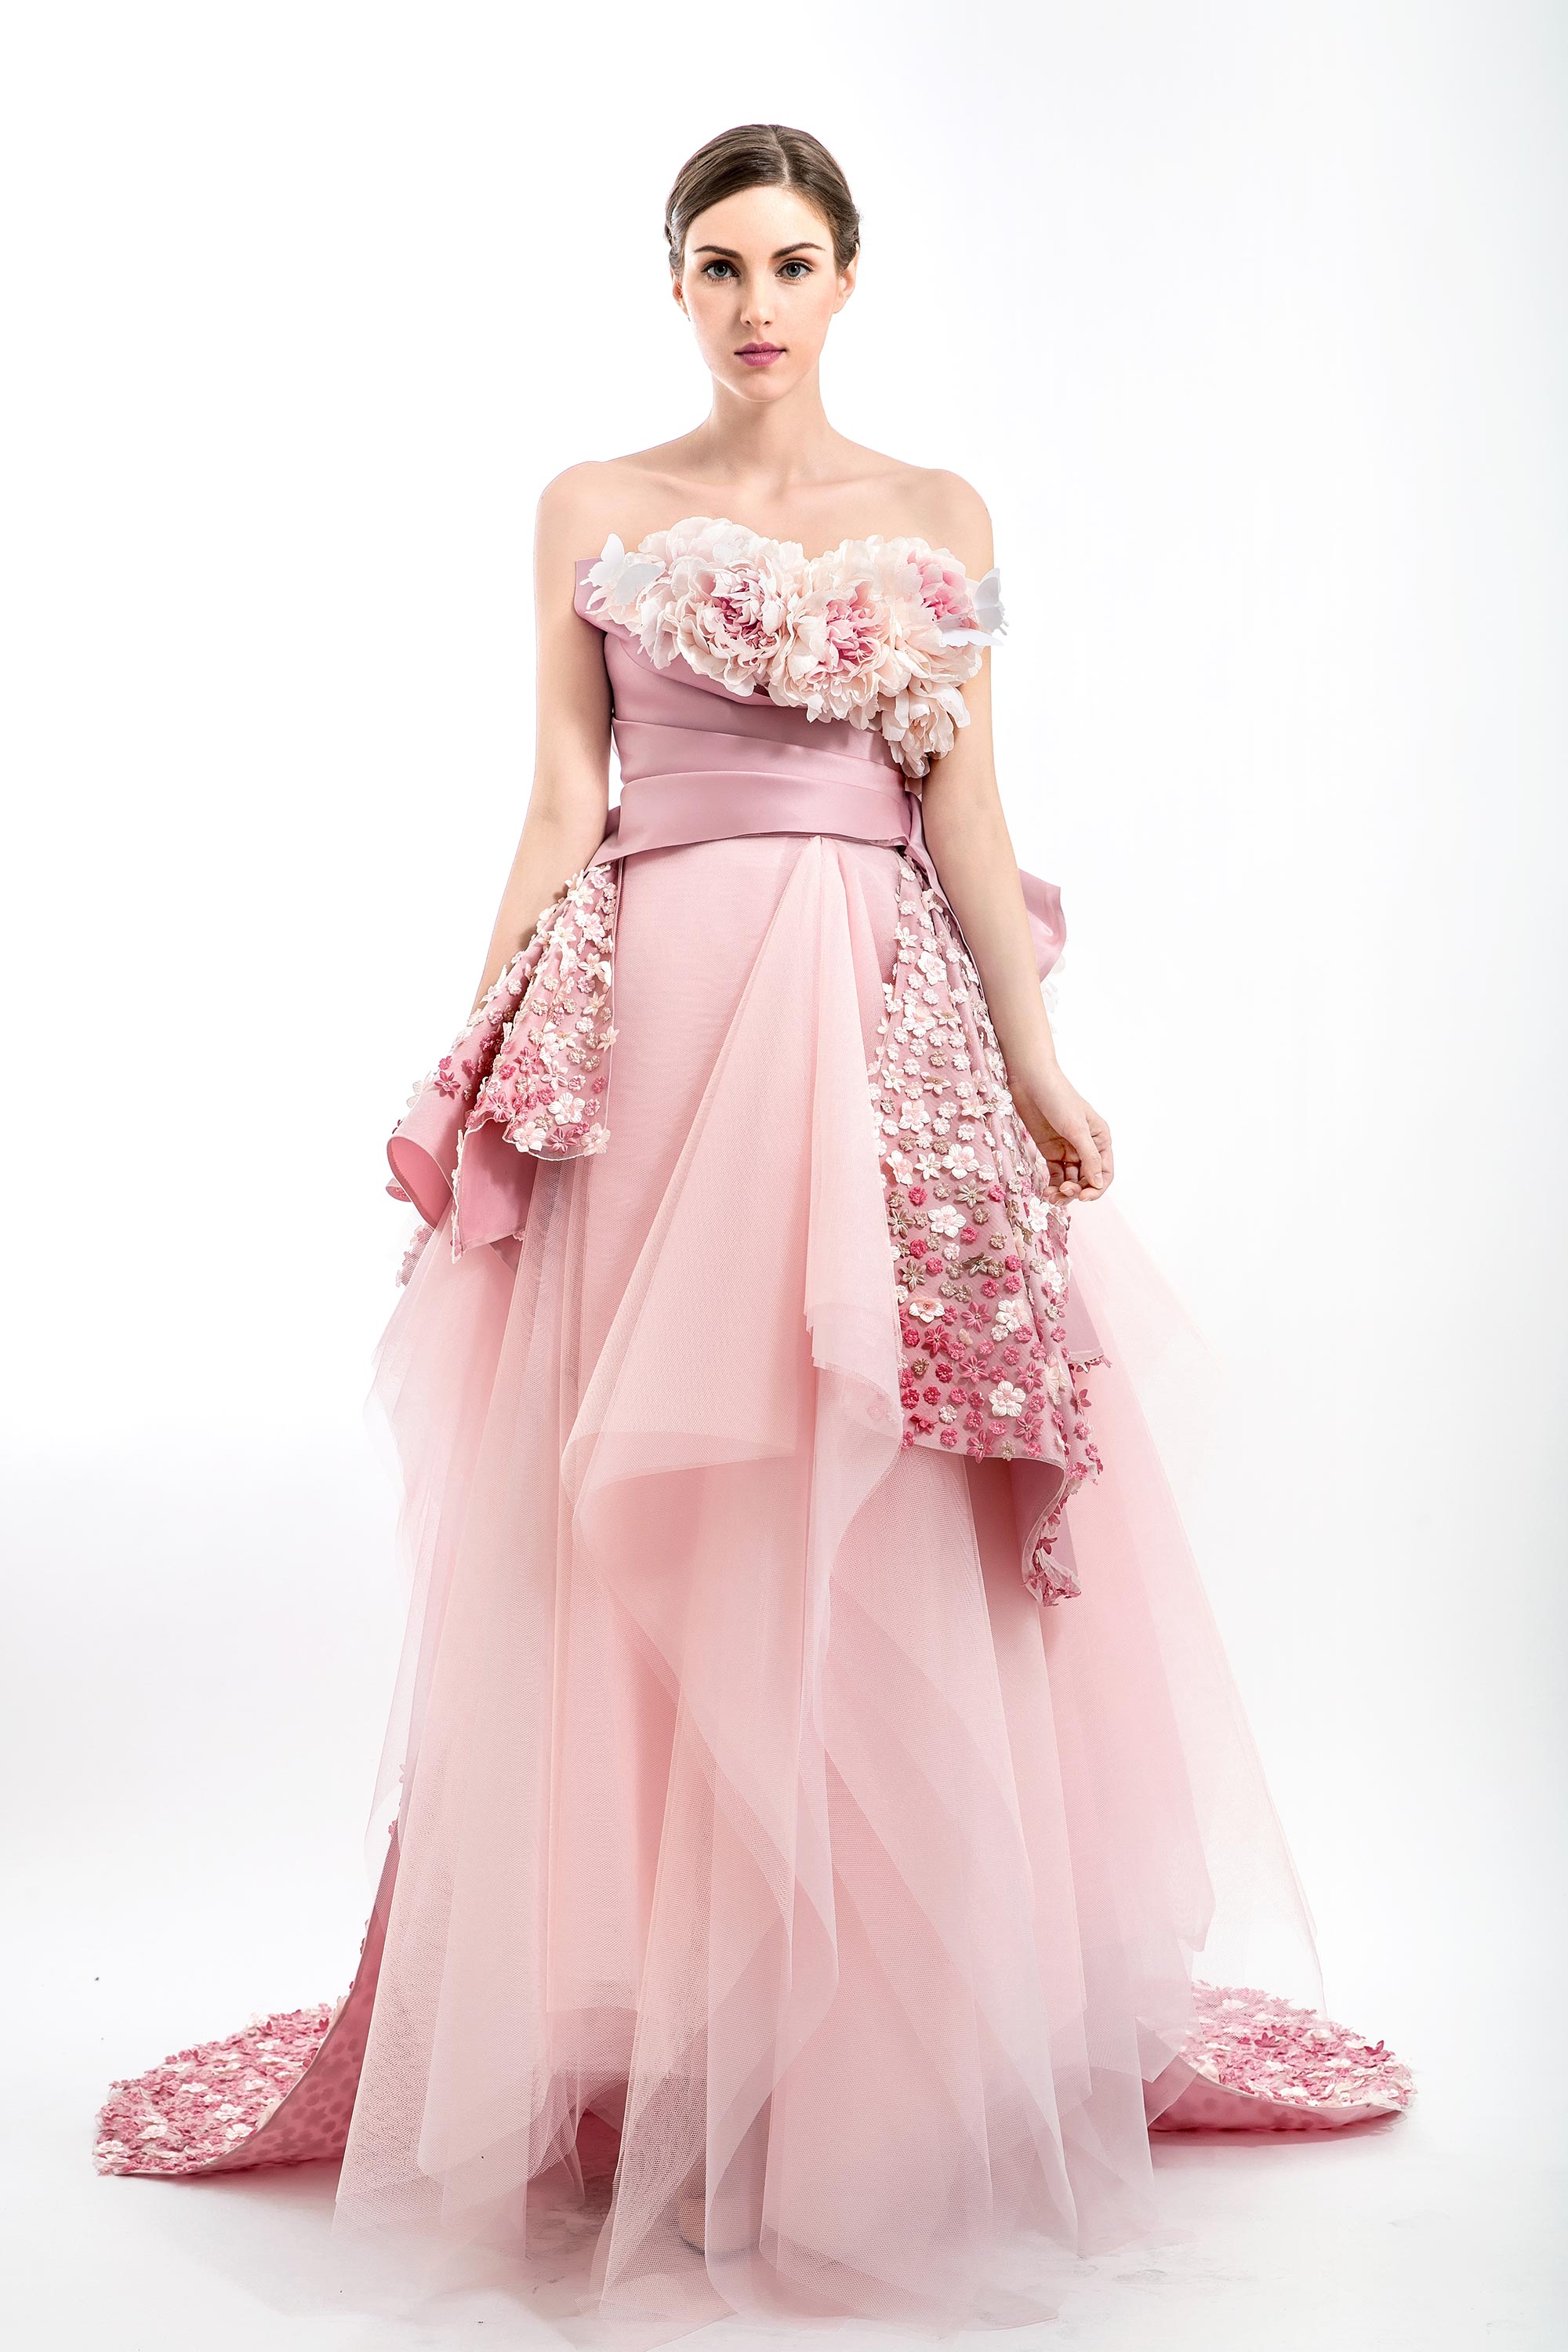 Peonies Embellished Strapless Ball Gown, Pink